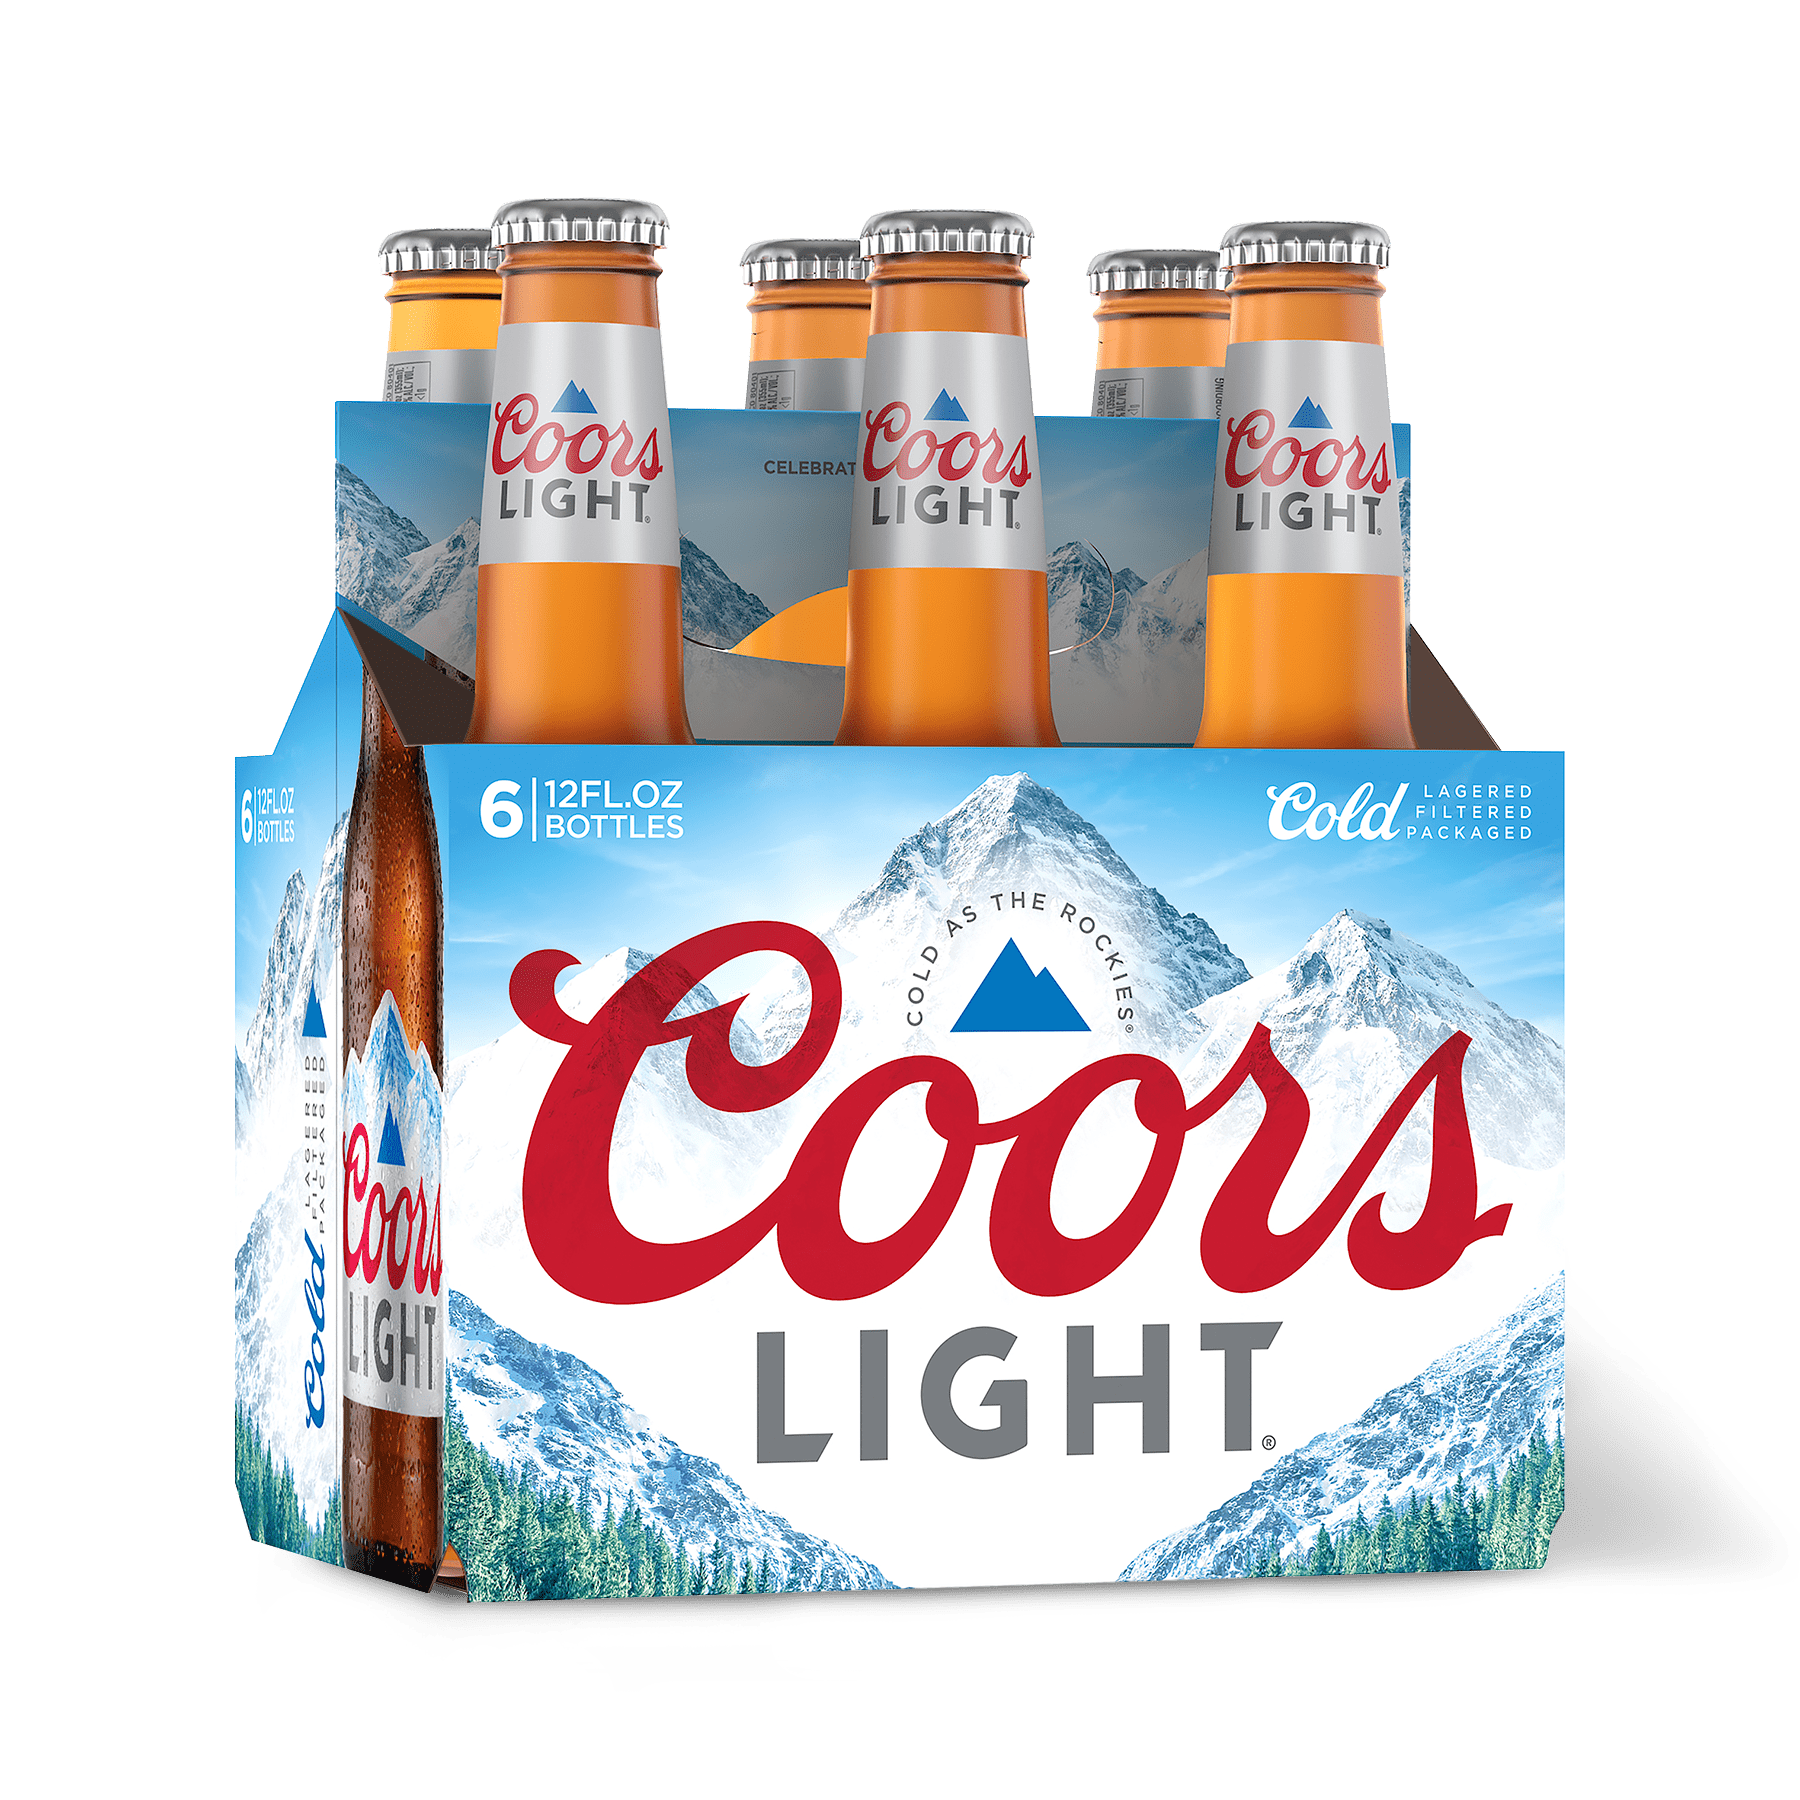 Coors Light Beer Near You, Always Ready 7Eleven